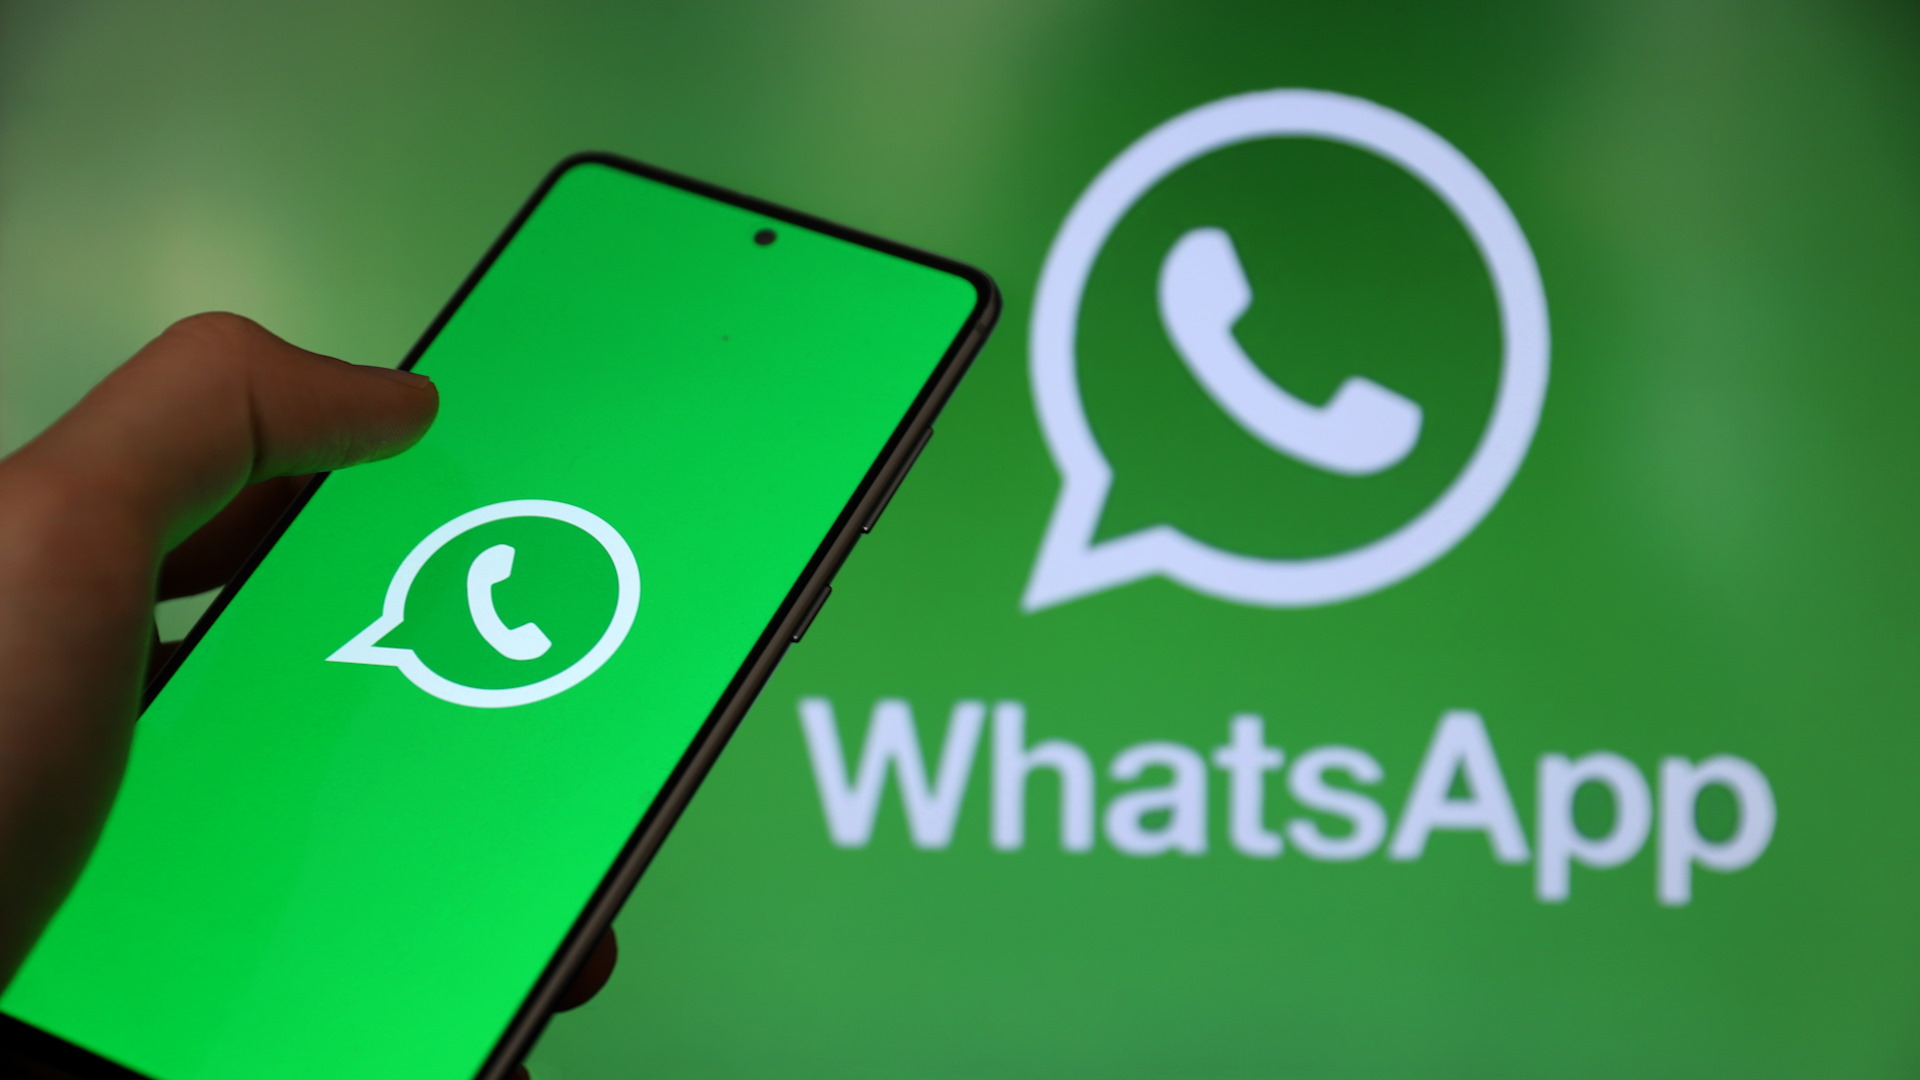 WhatsApp is considering showing ads when you open a user’s status